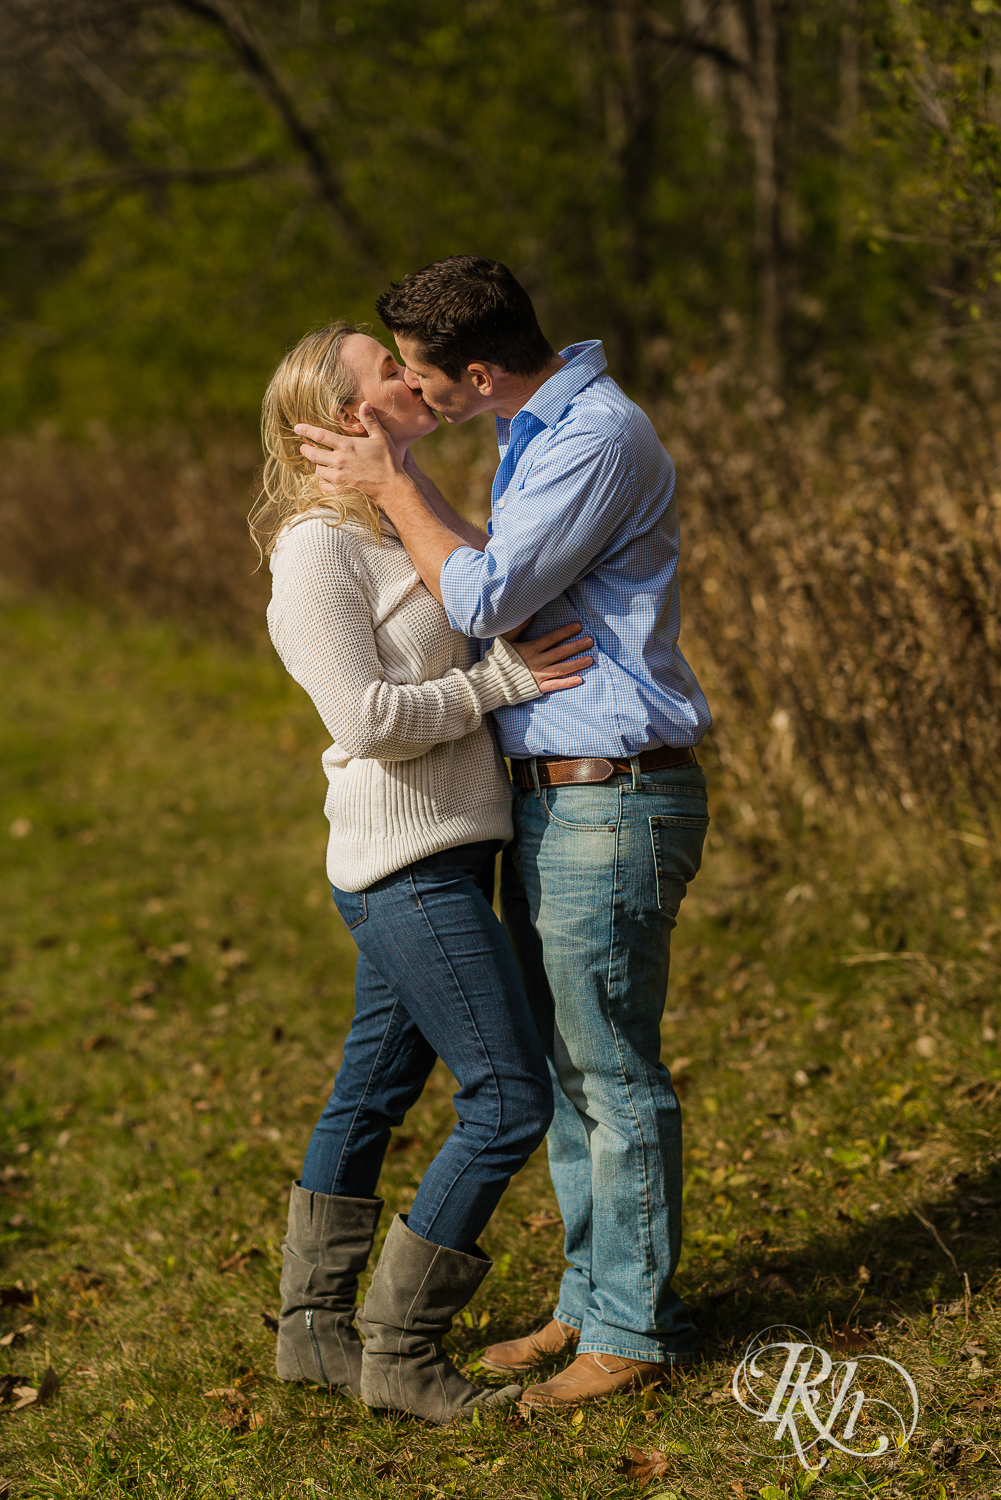 Man kisses blonde woman in grass during fall engagement photography session in Chaska, Minnesota.